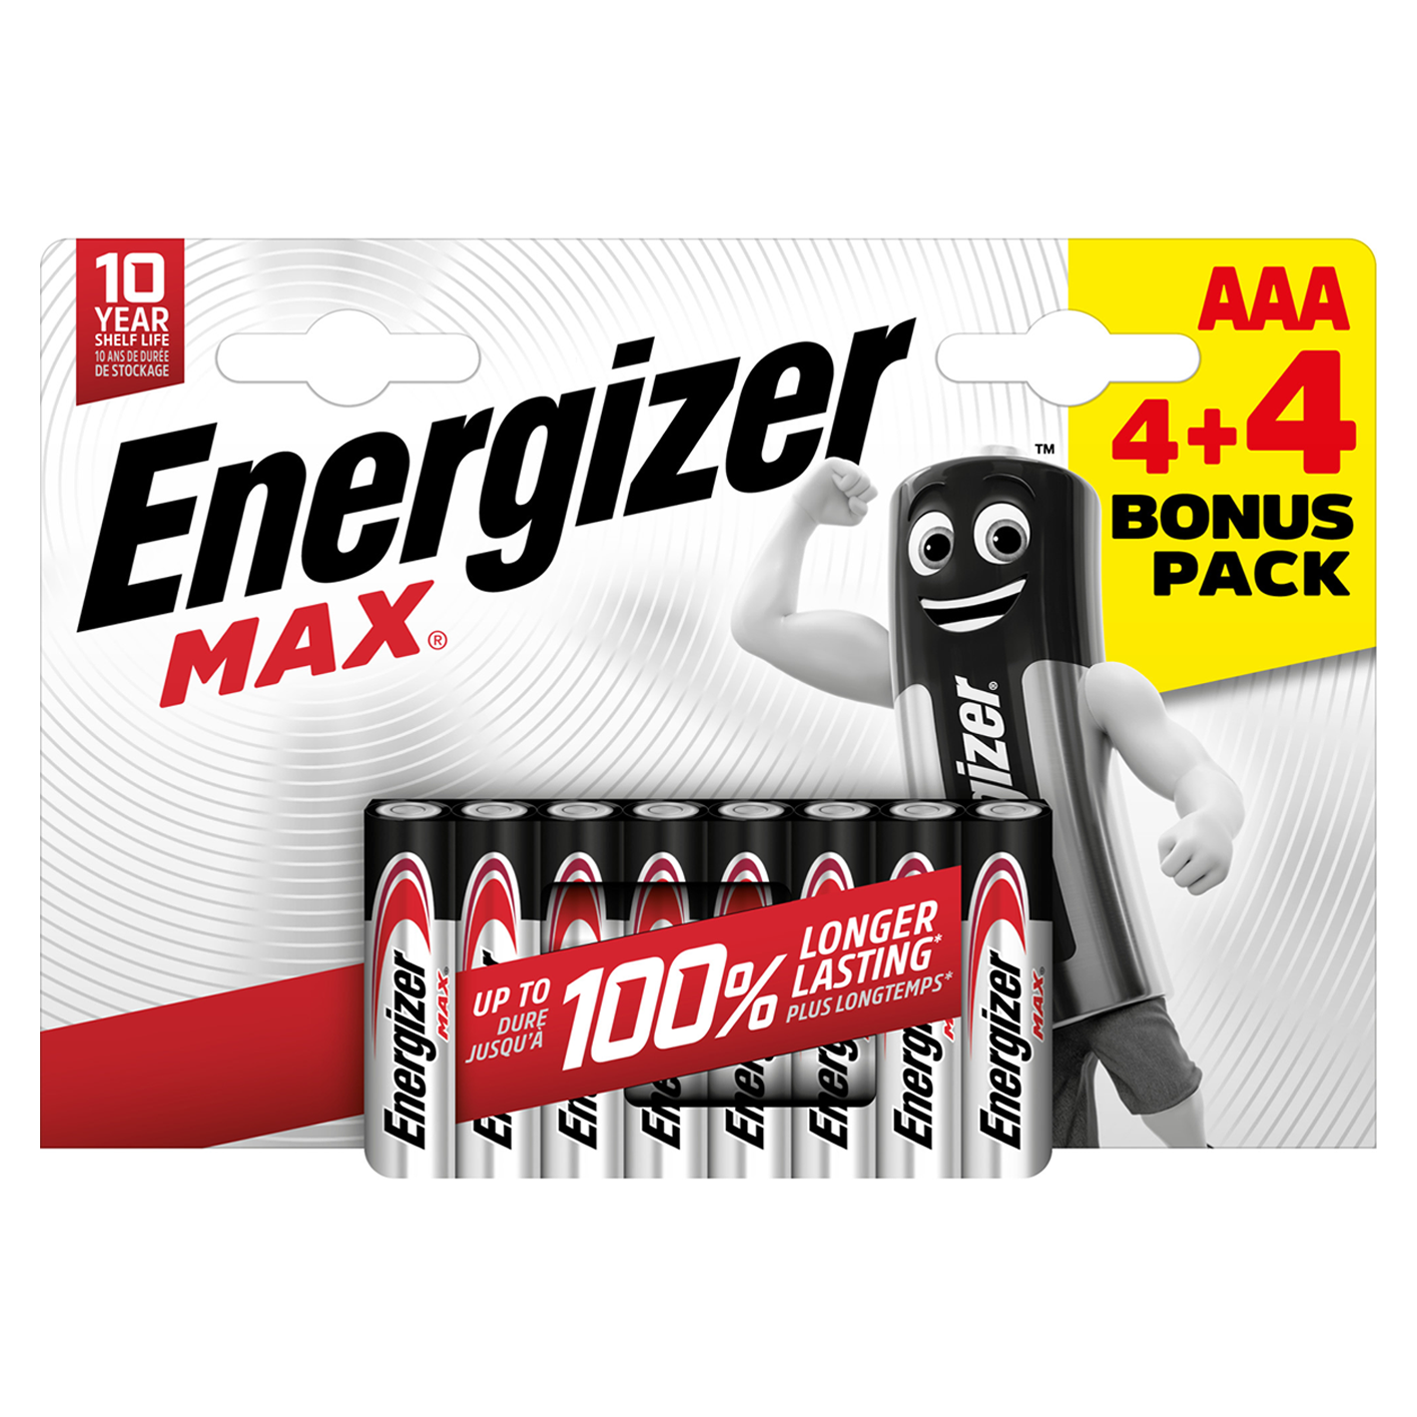 Energizer AAA Max Alkaline, Pack of 4+4